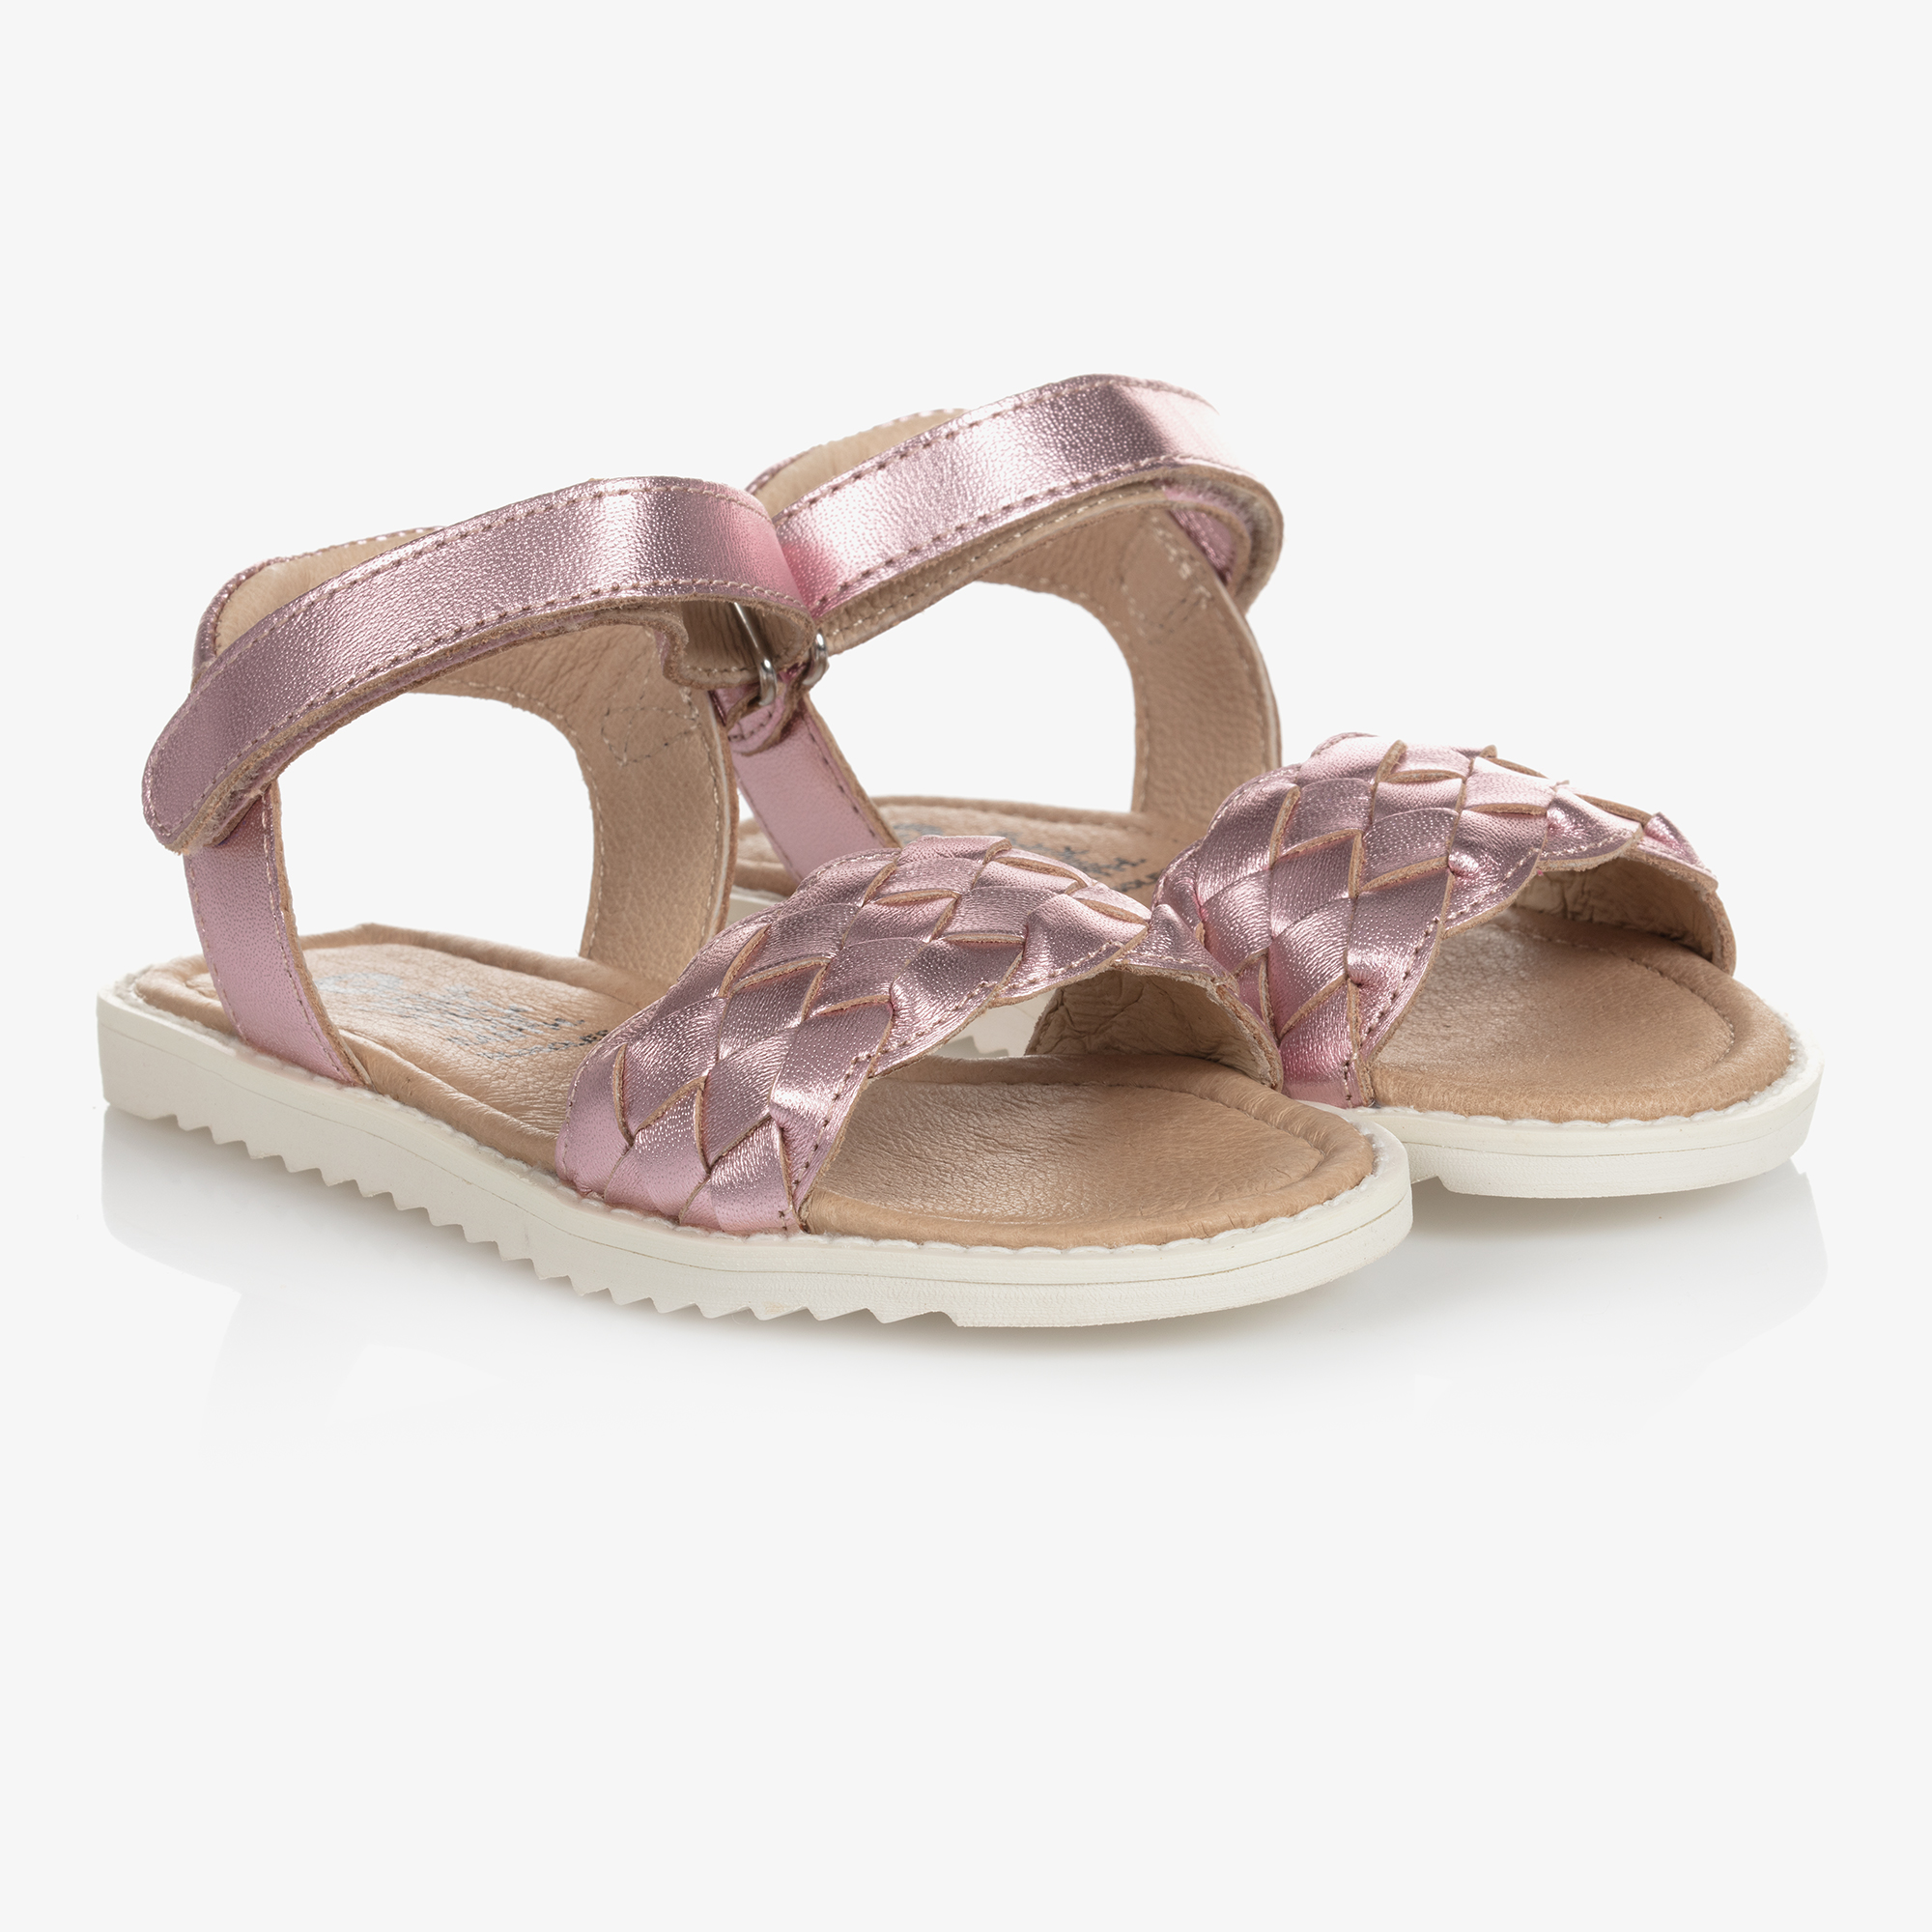 Old Soles - Girls Brown Leather Sandals | Childrensalon Outlet